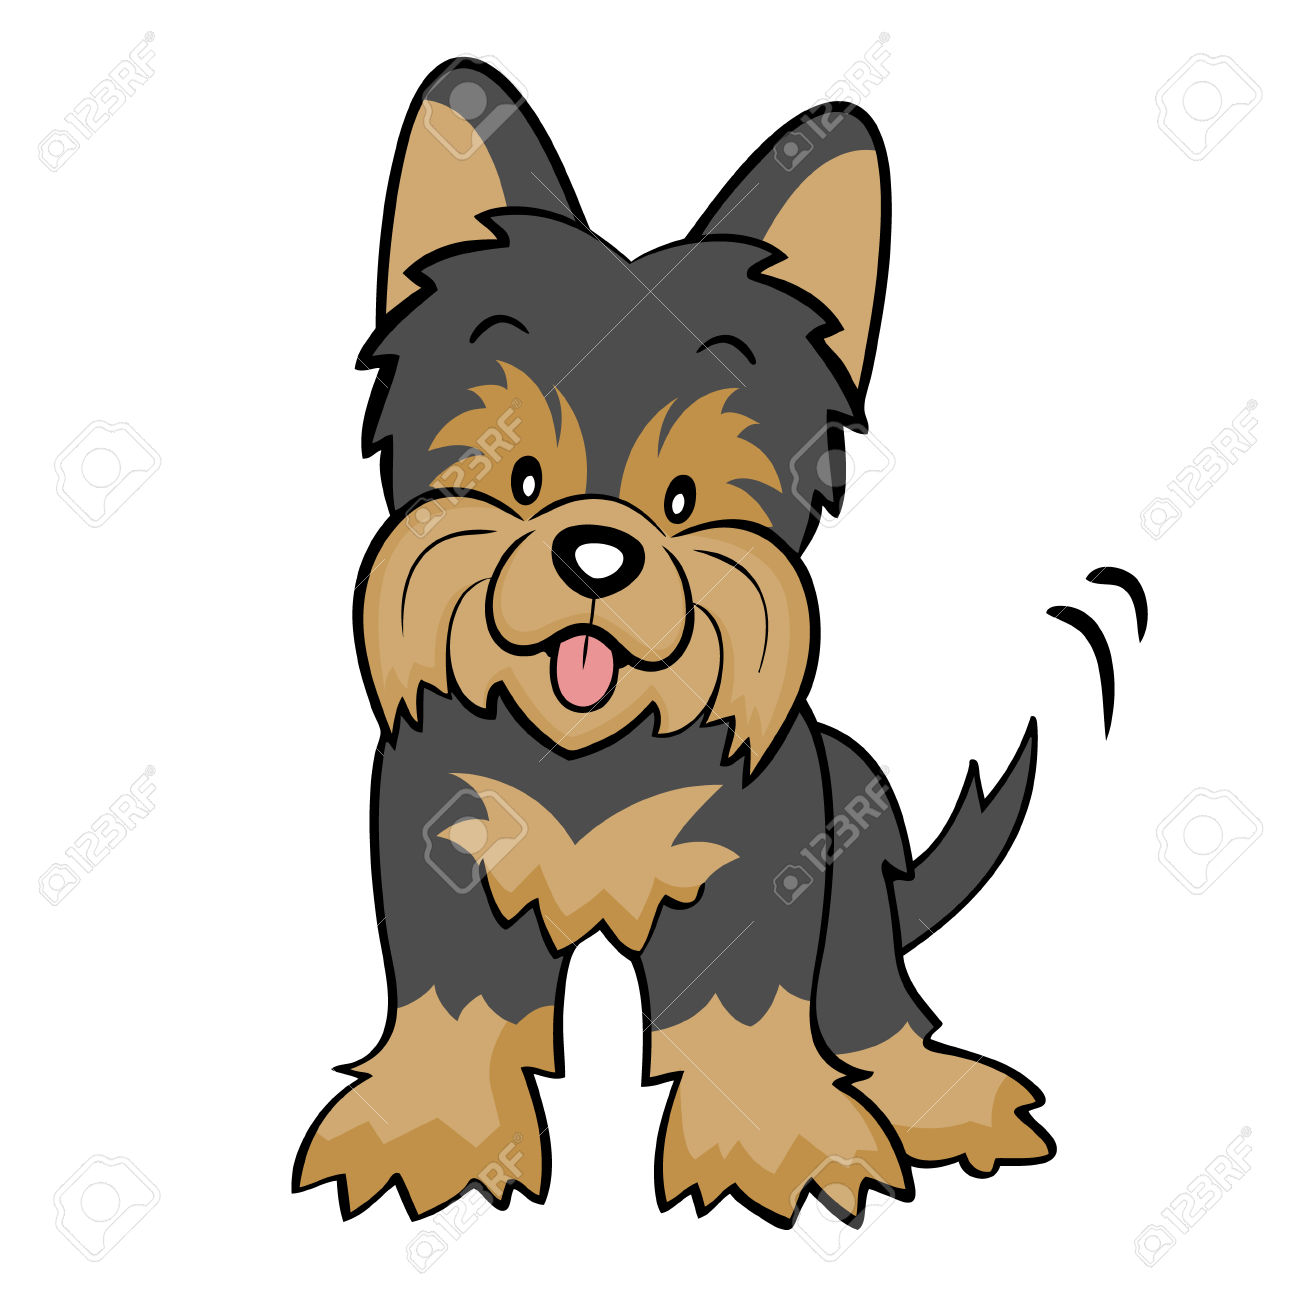 Yorkshire Terrier clipart #10, Download drawings